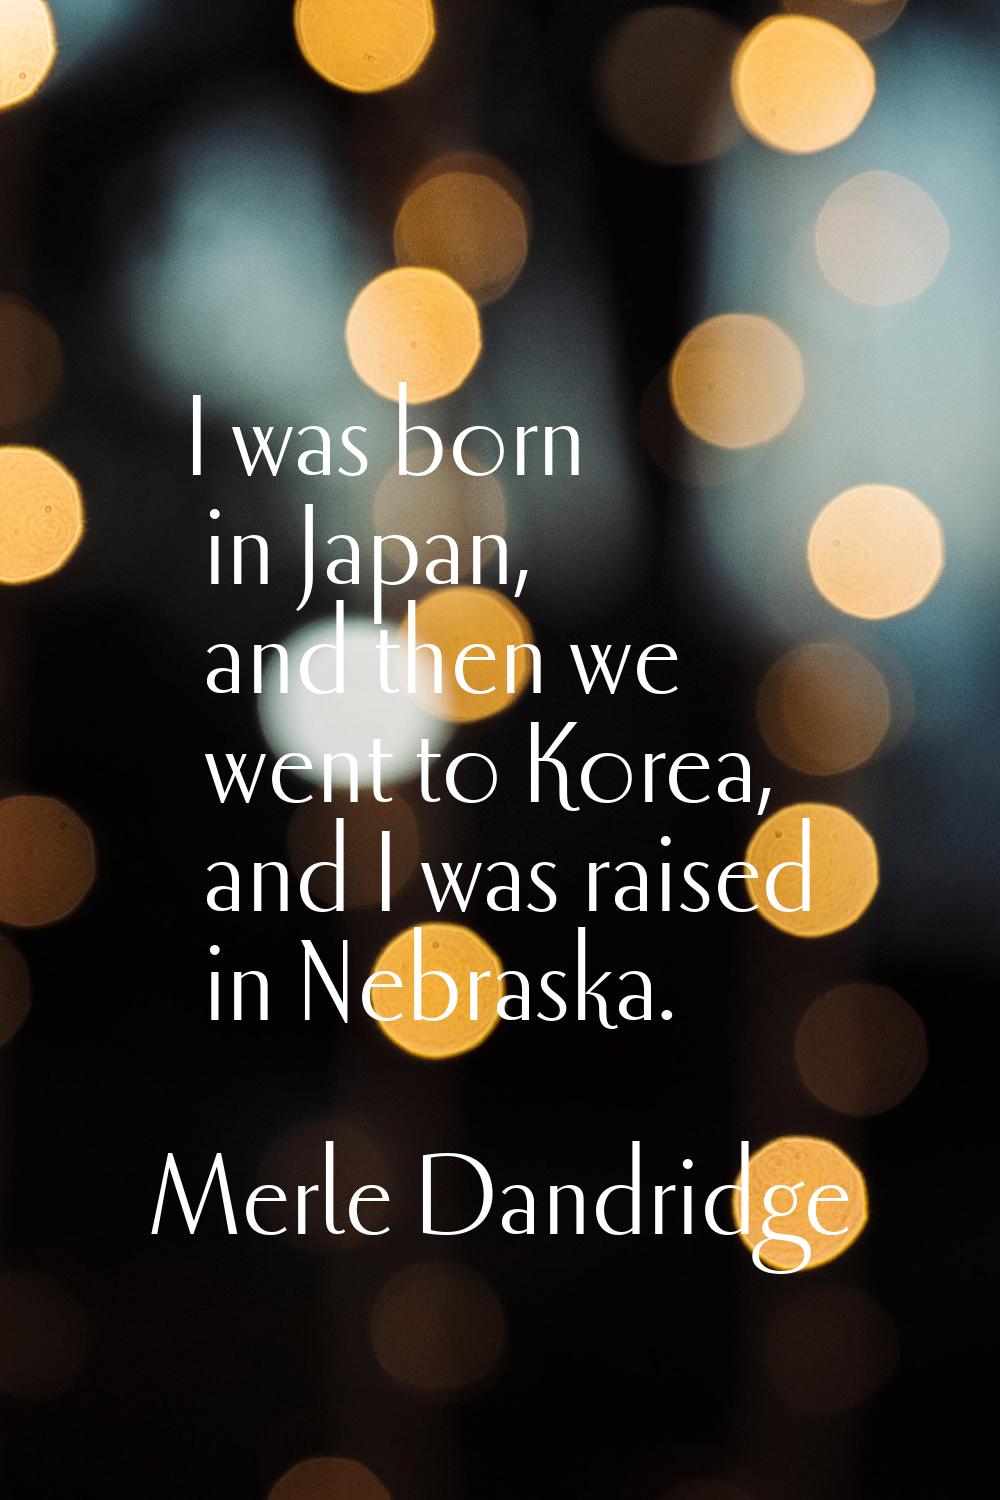 I was born in Japan, and then we went to Korea, and I was raised in Nebraska.